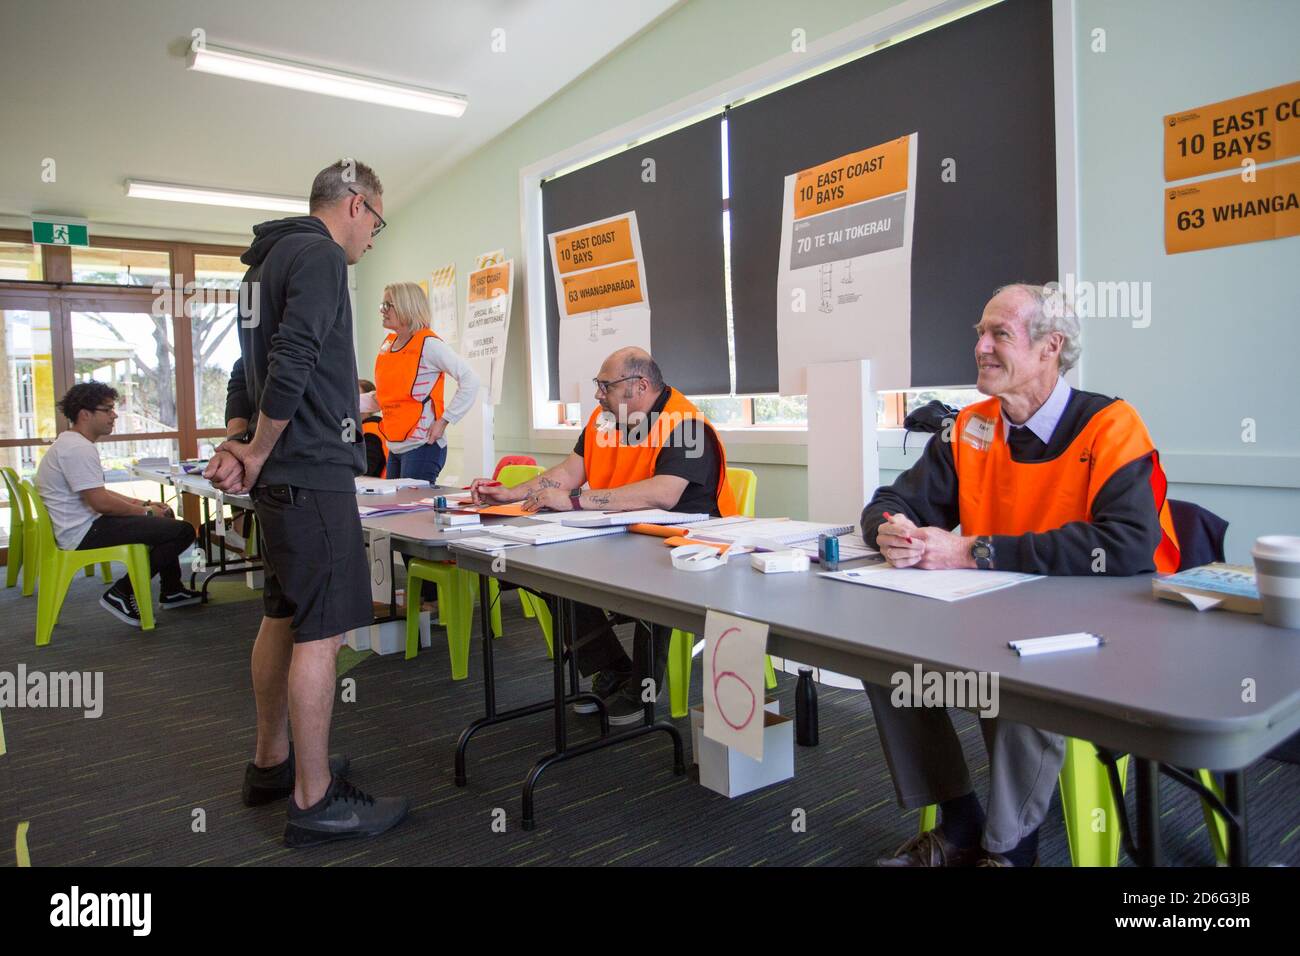 Auckland. 17th Oct, 2020. Local people wait to vote ballots at a voting station in Auckland, New Zealand on Oct. 17, 2020. Saturday is election day and the last chance to vote in the 2020 General Election and referendums, according to a statement of New Zealand's Electoral Commission. Credit: Wilson/Xinhua/Alamy Live News Stock Photo